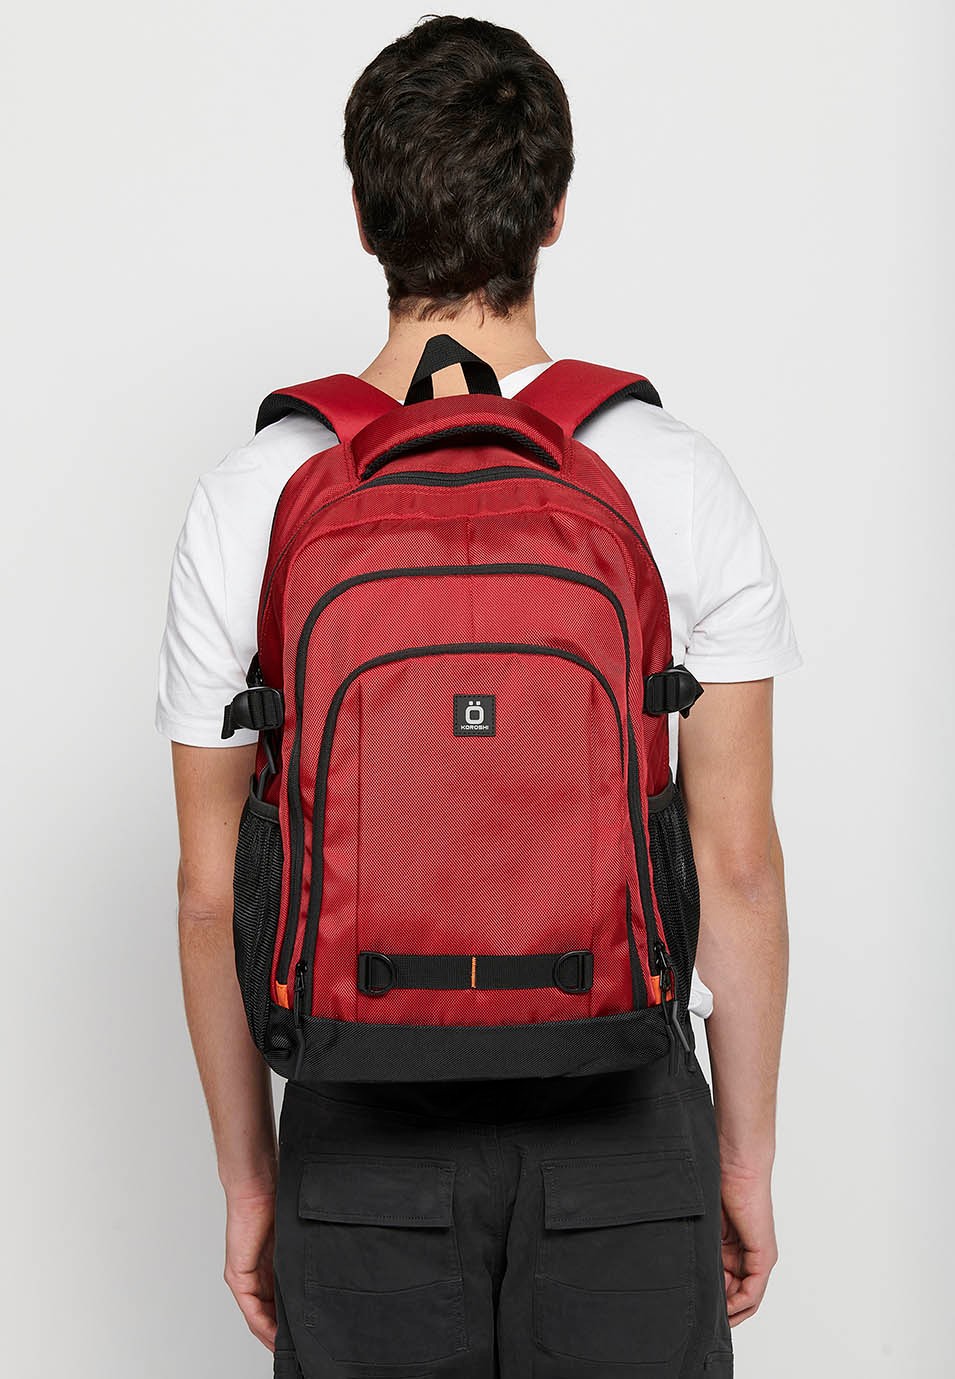 Koröshi backpack with three zippered compartments, one for laptop, with red interior pockets 6